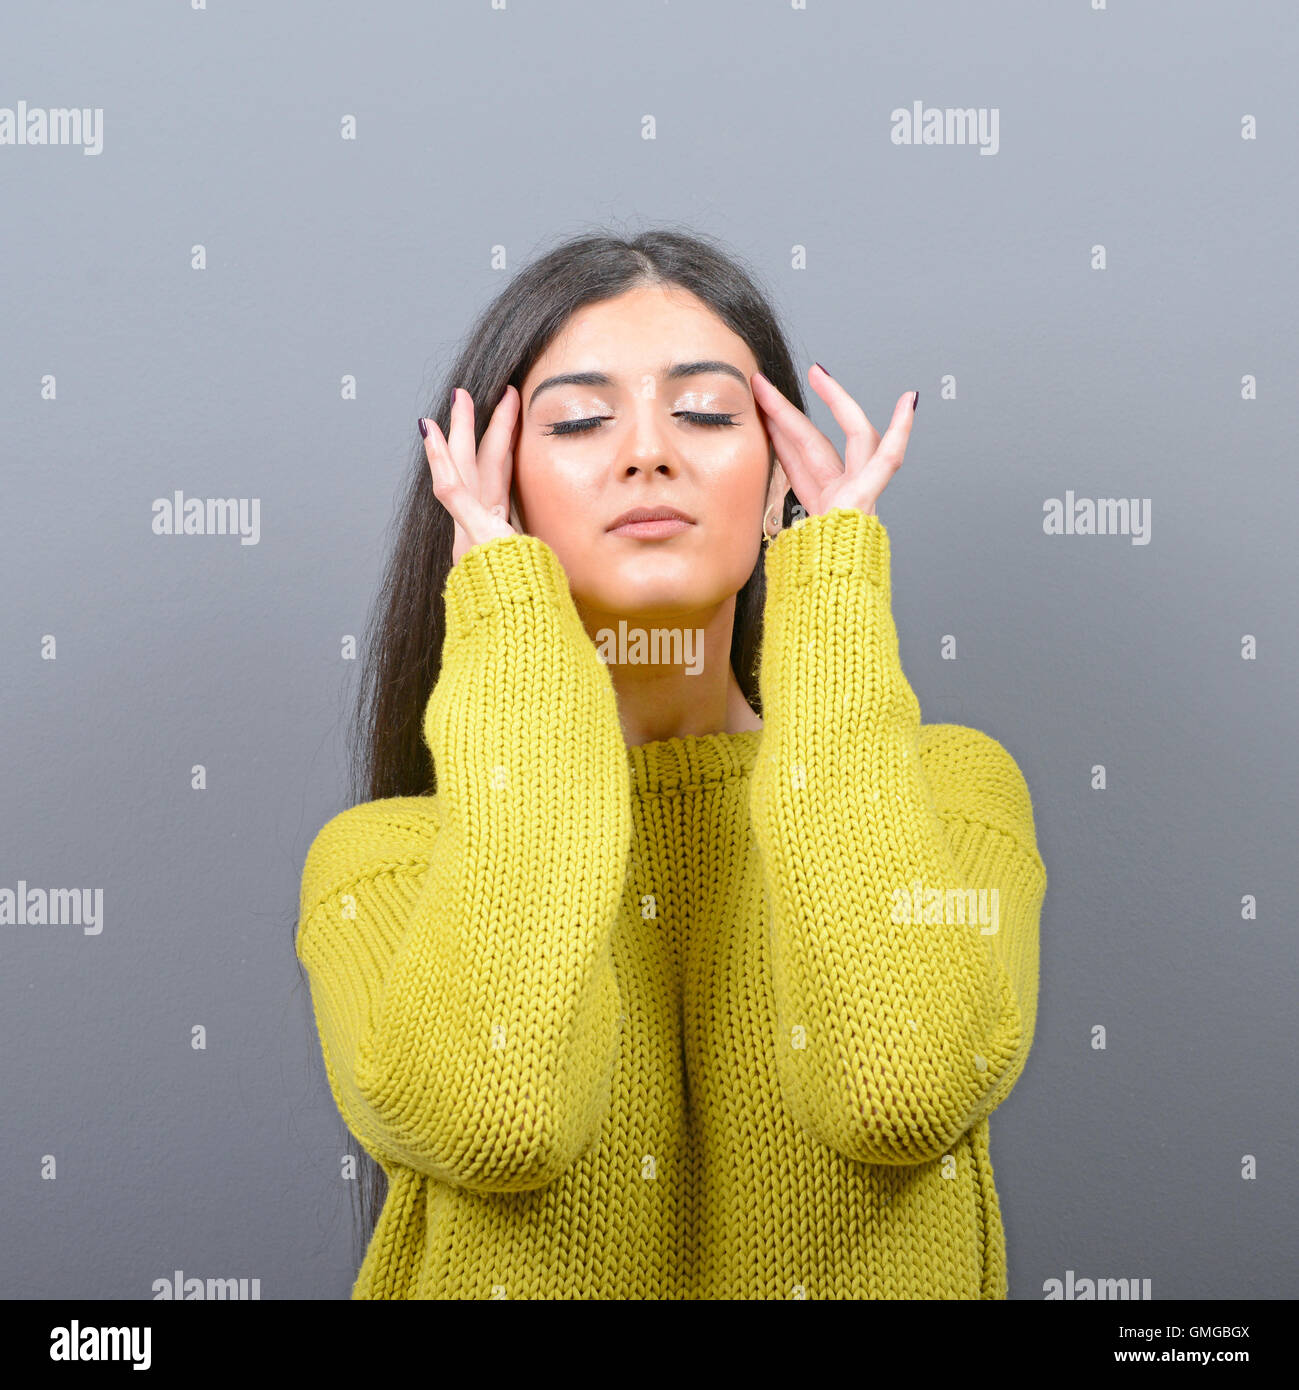 Portrait of woman concentrating against gray background Stock Photo